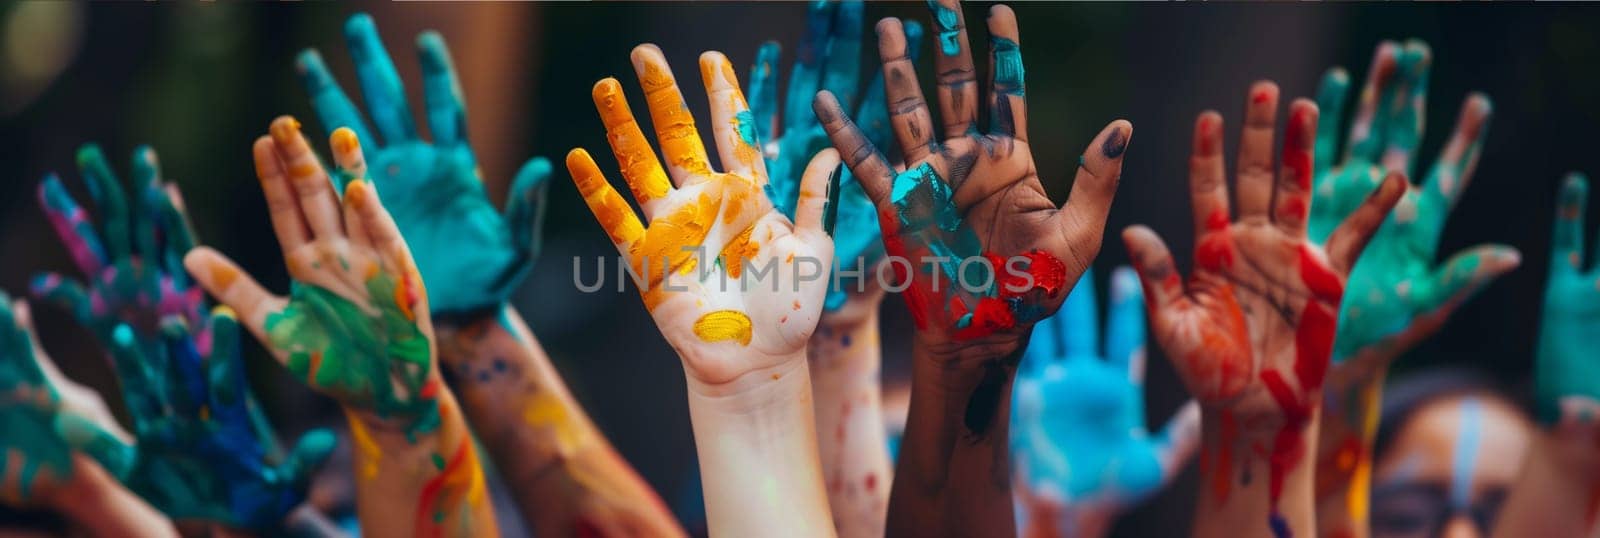 Group of People With Colorful Paint on Their Hands by Sd28DimoN_1976